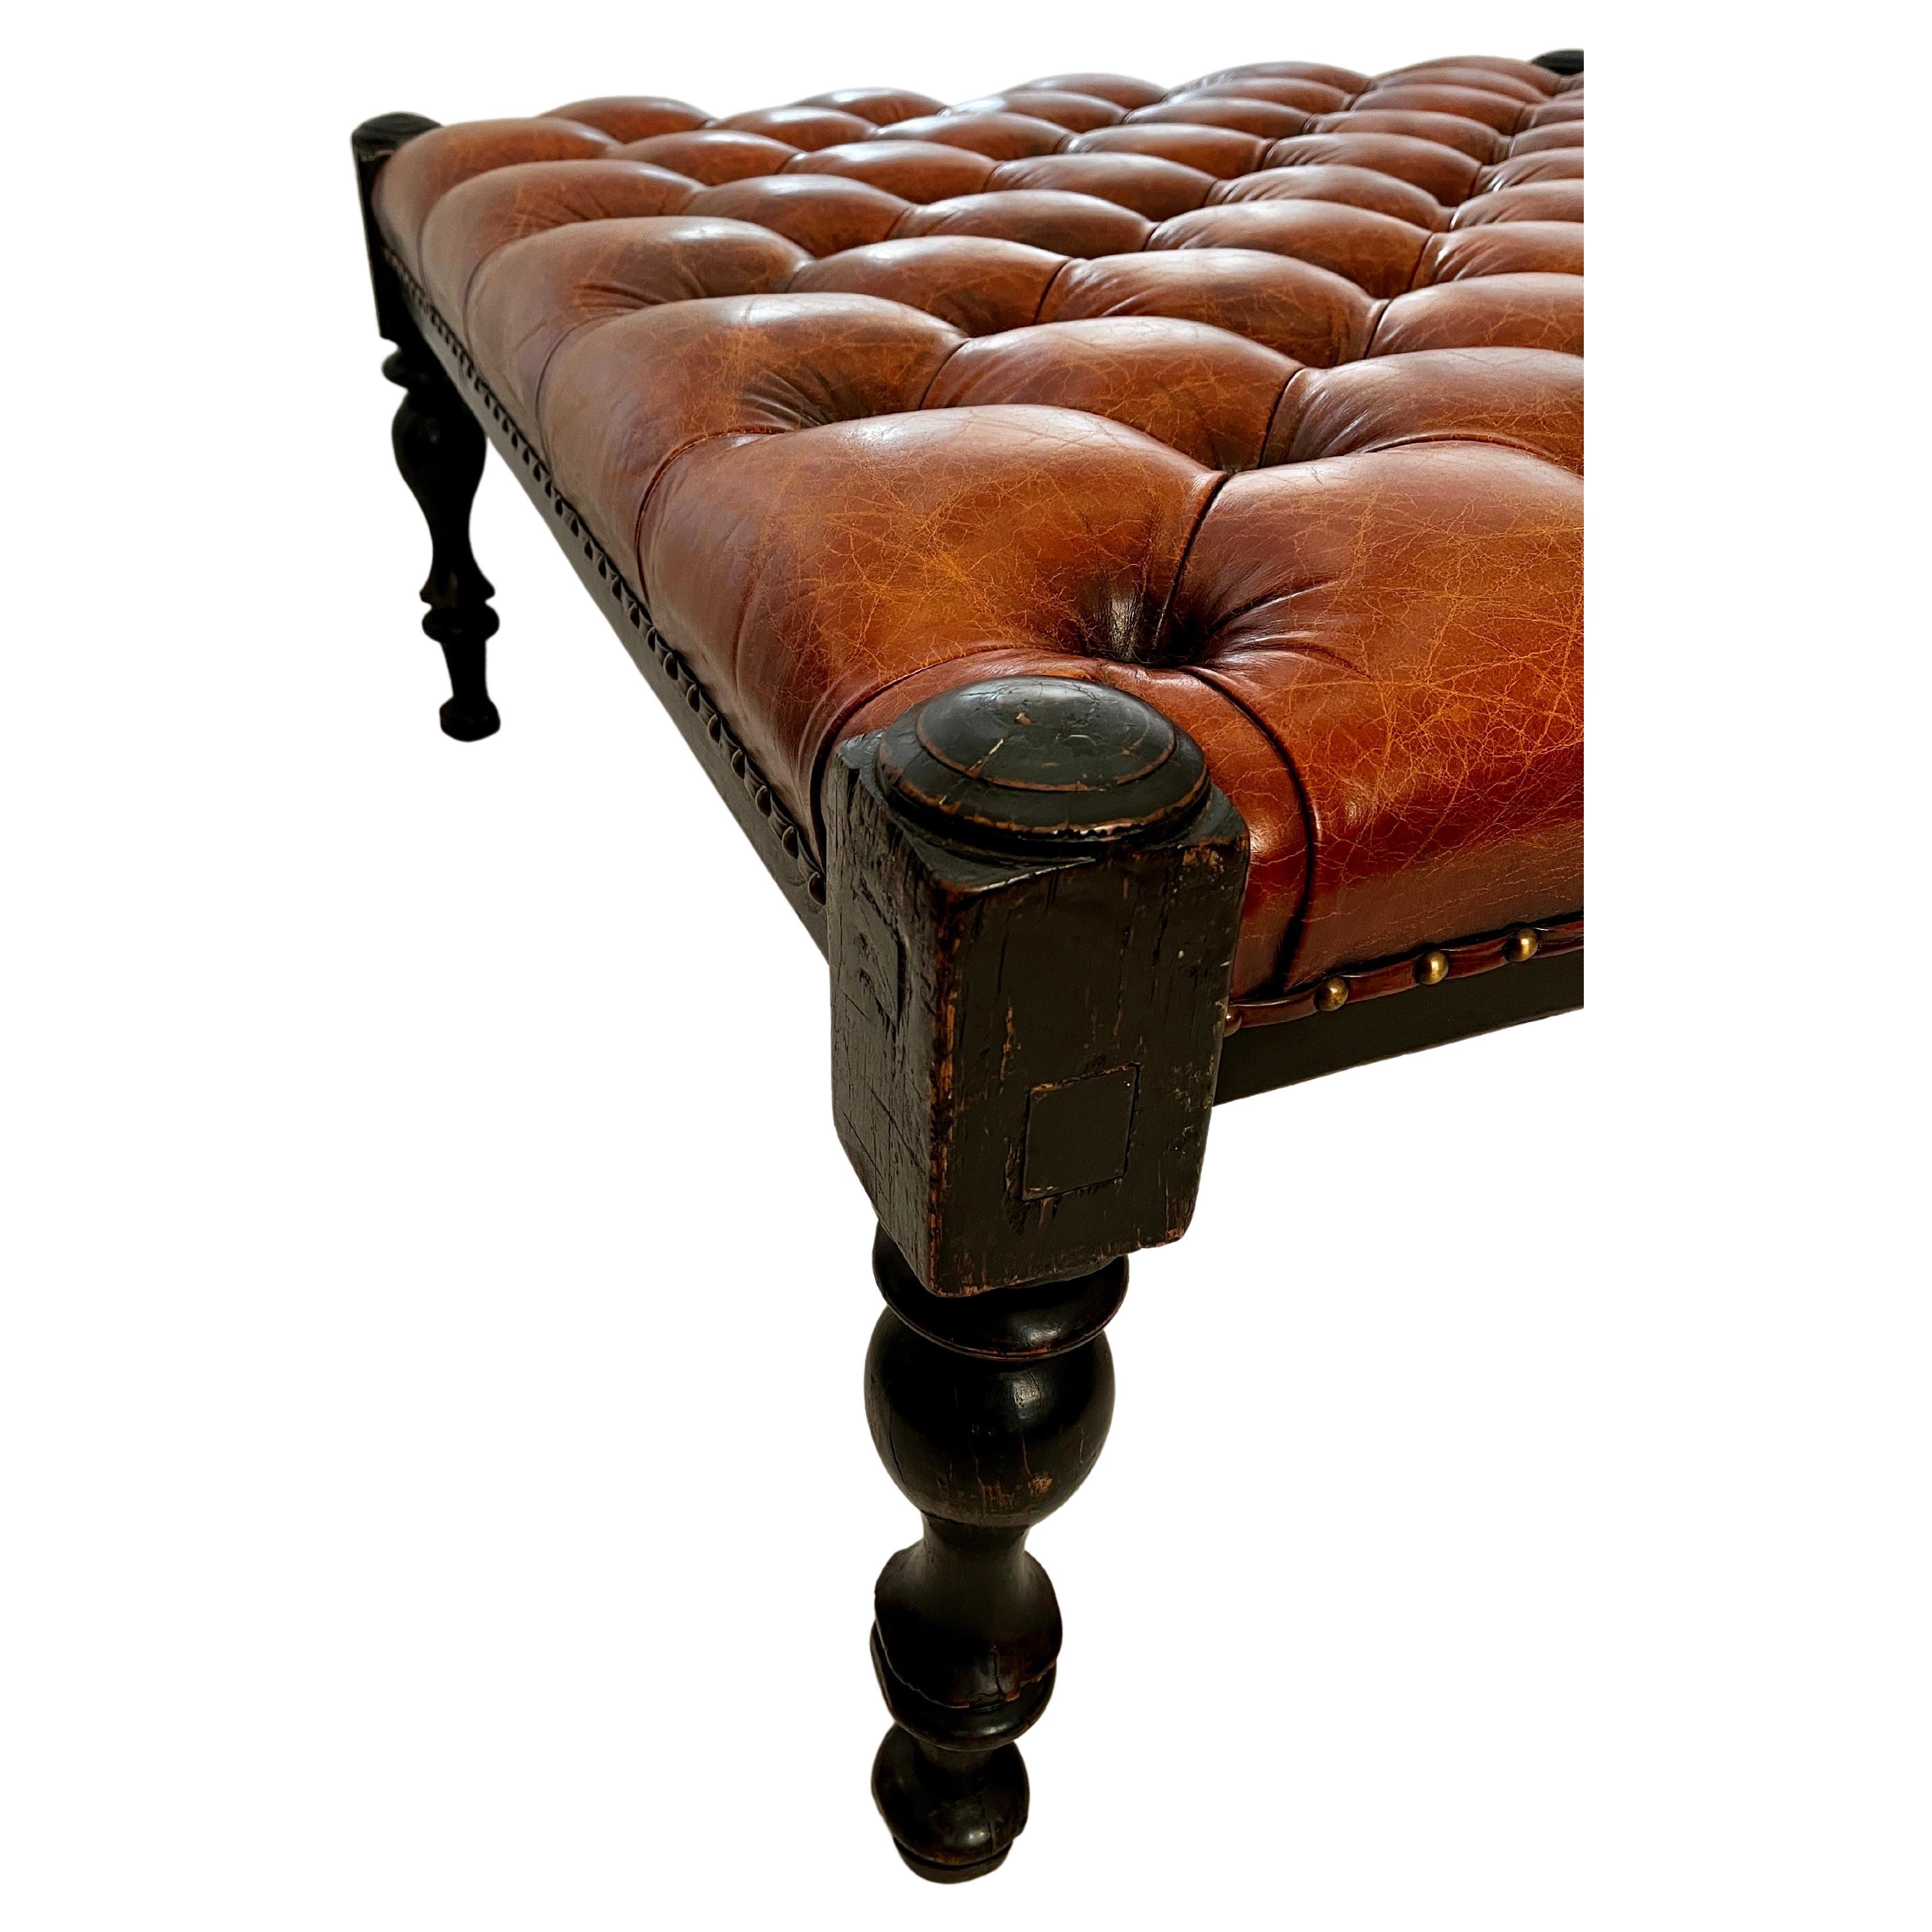 Classic Leather Tufted Ottoman in the style of Ralph Lauren. 